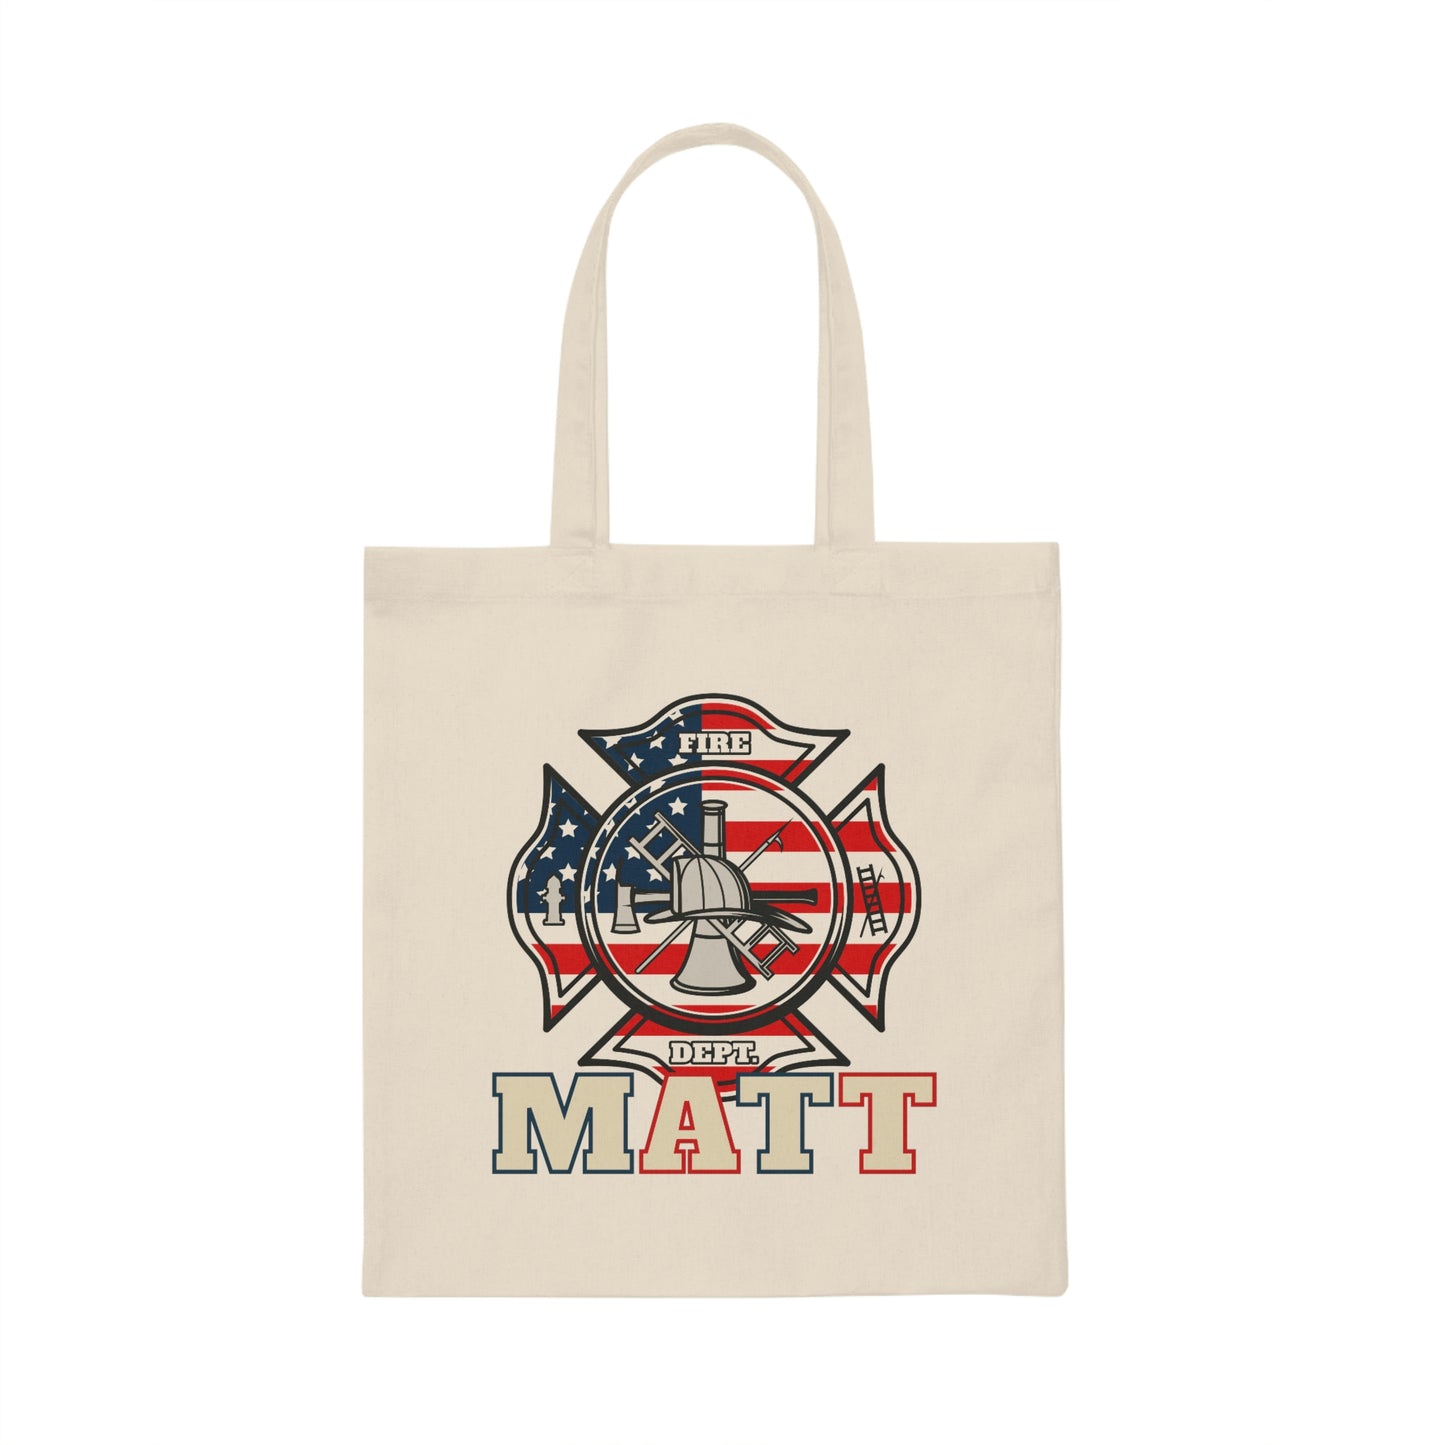 Firefighter Personalized Canvas Tote Bag | Red White Blue Fire Department Emblem